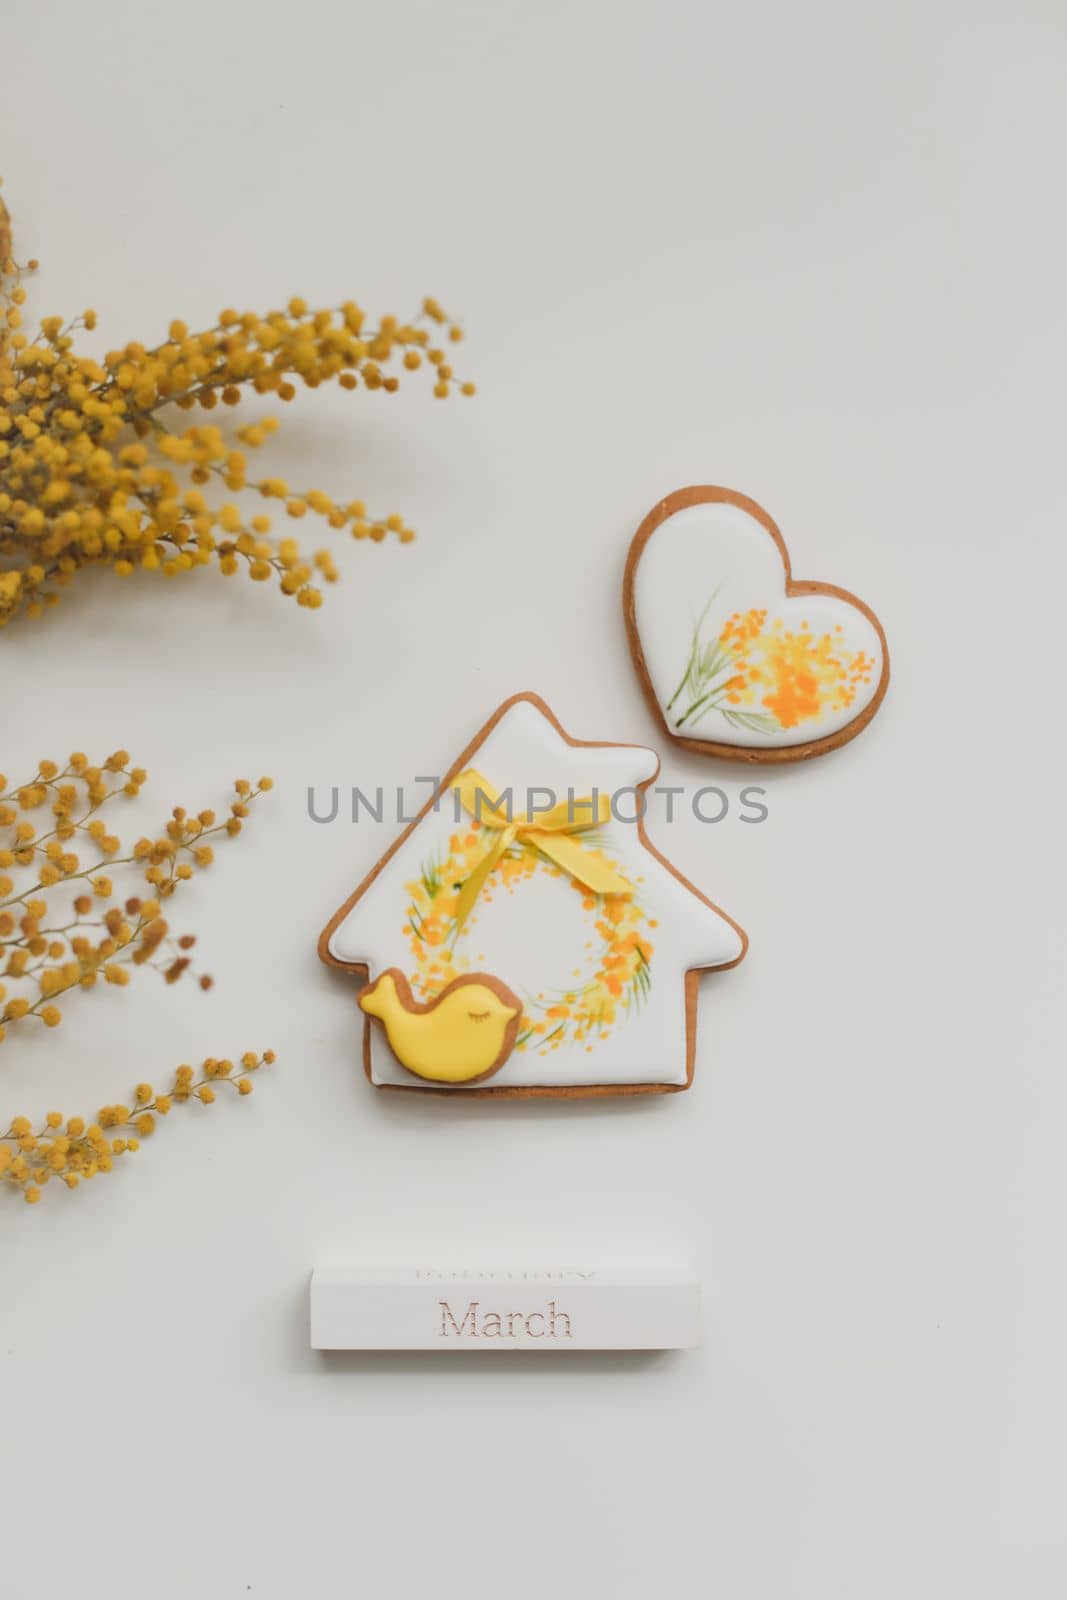 Women's Day, March 8, figure eight, gingerbread, flowers. space for text